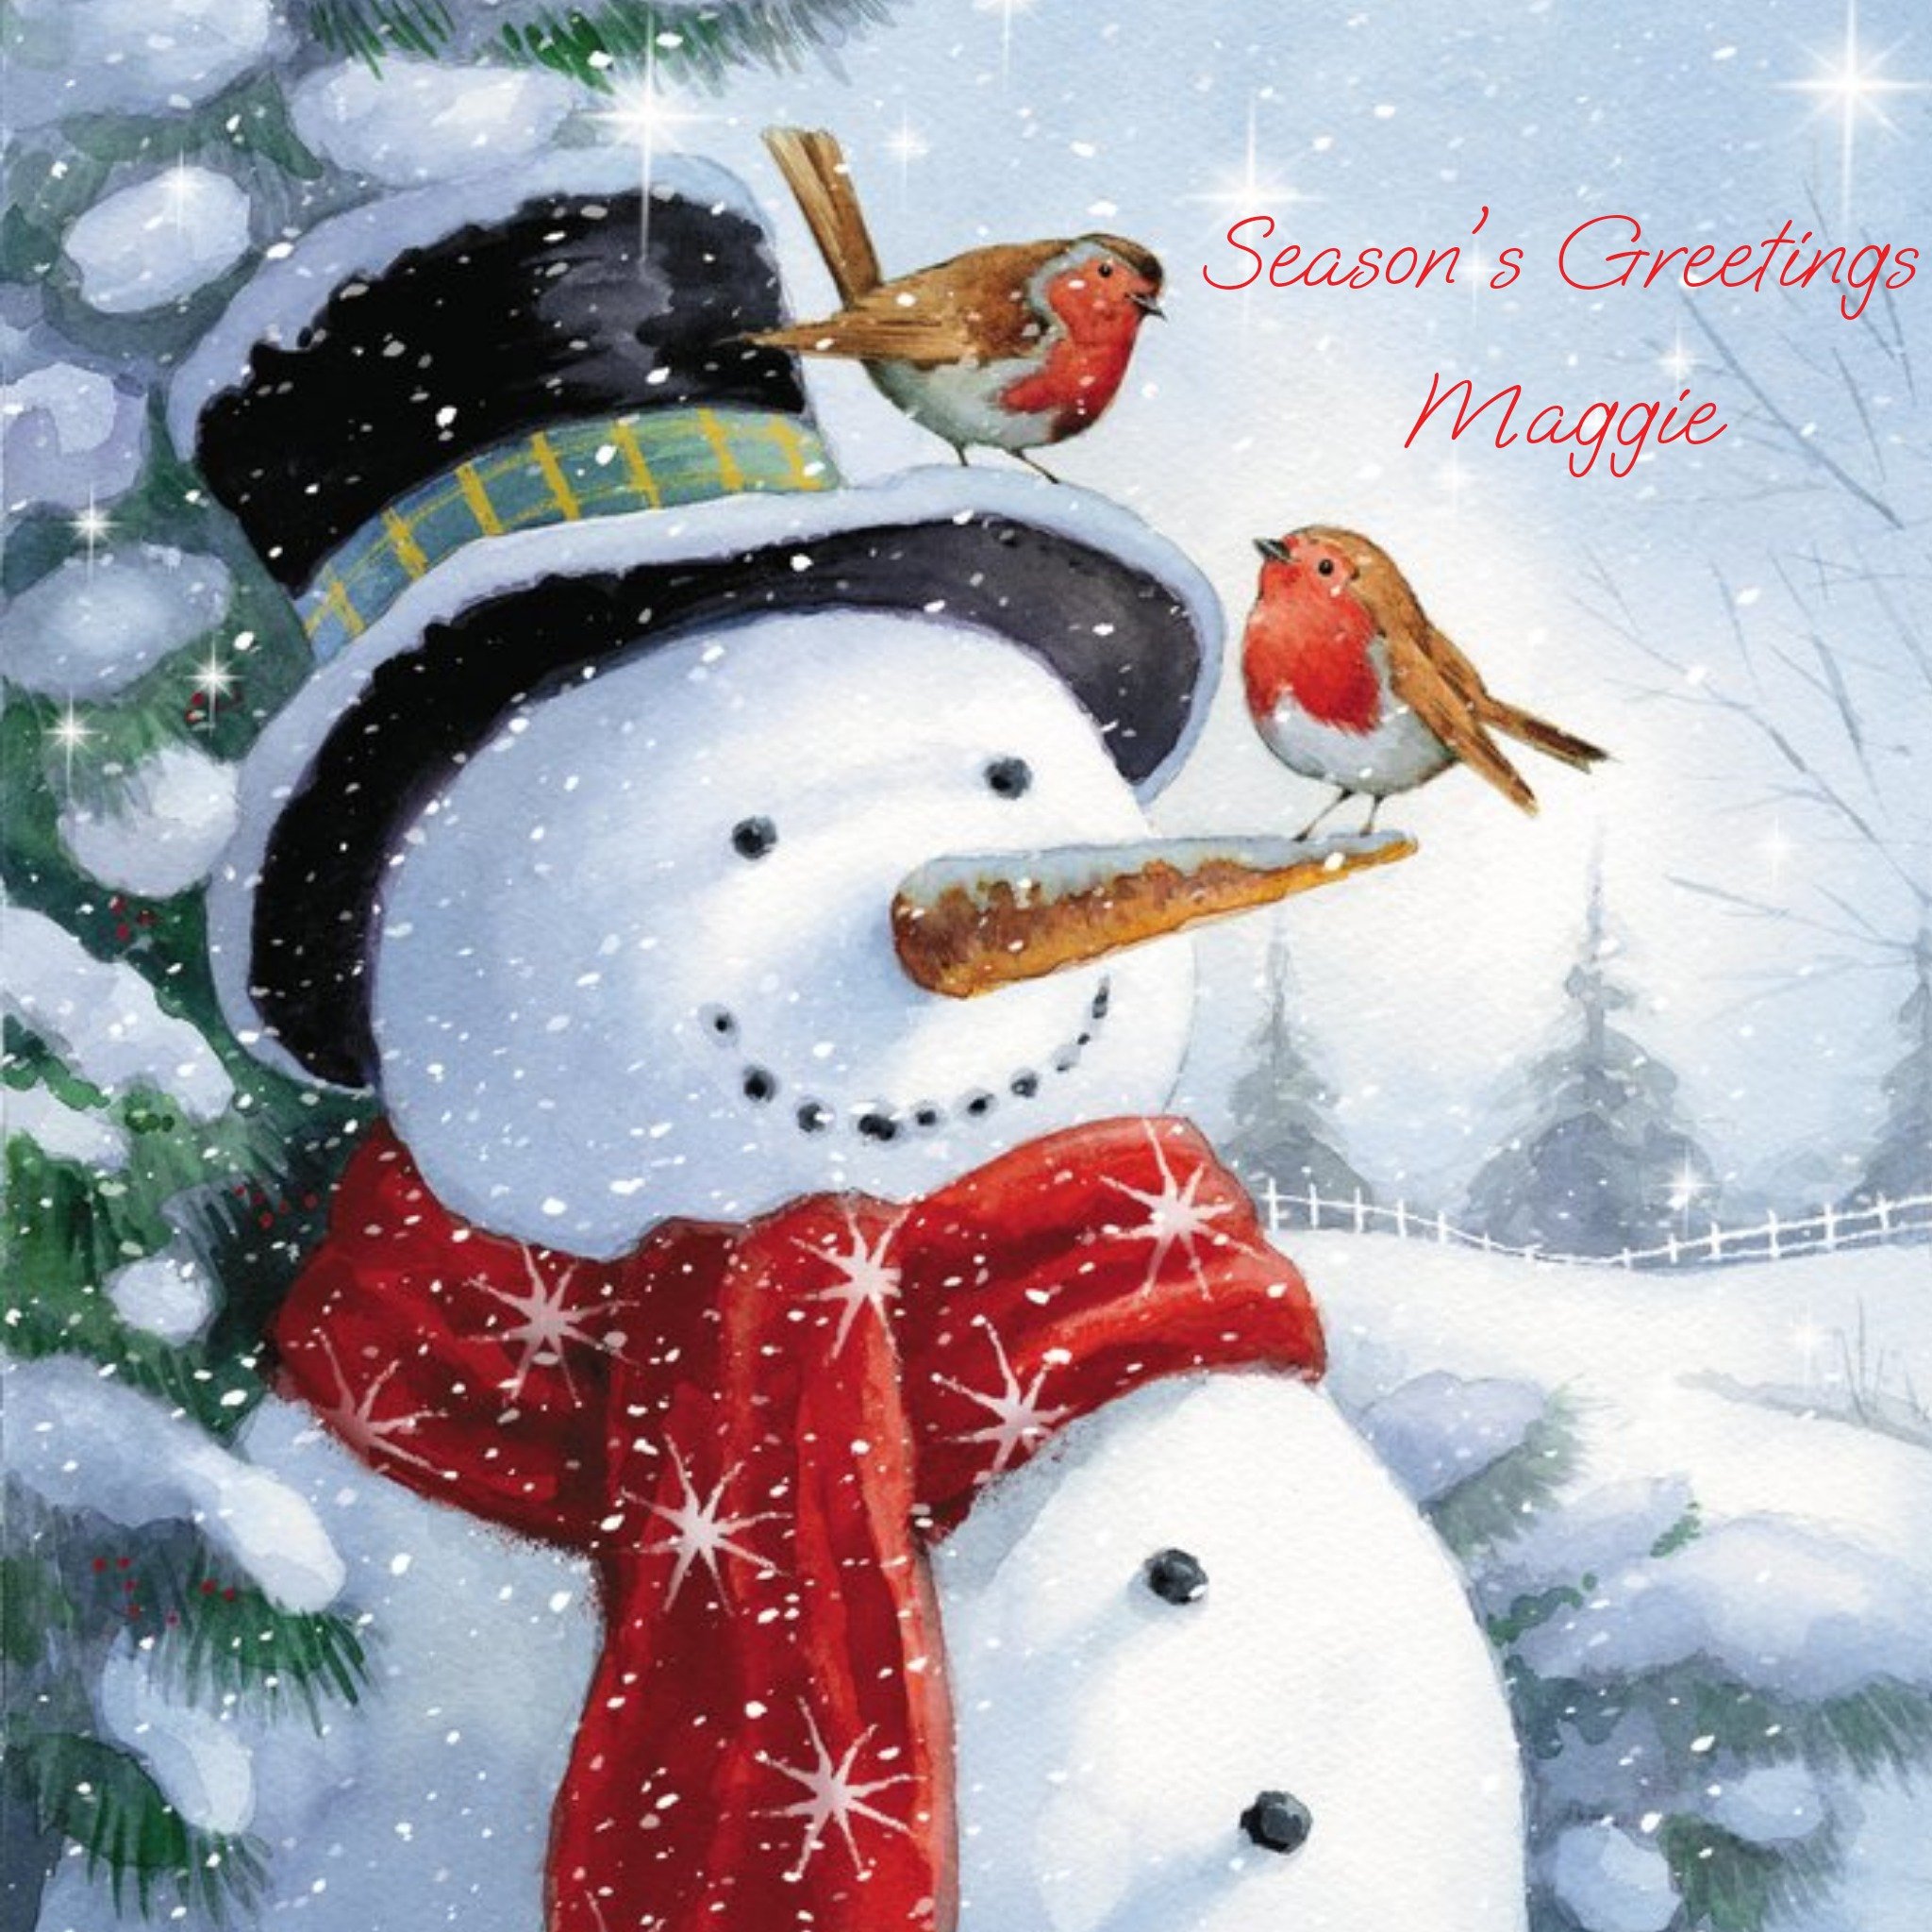 Moonpig Snowman And Two Robins - Christmas Card, Square